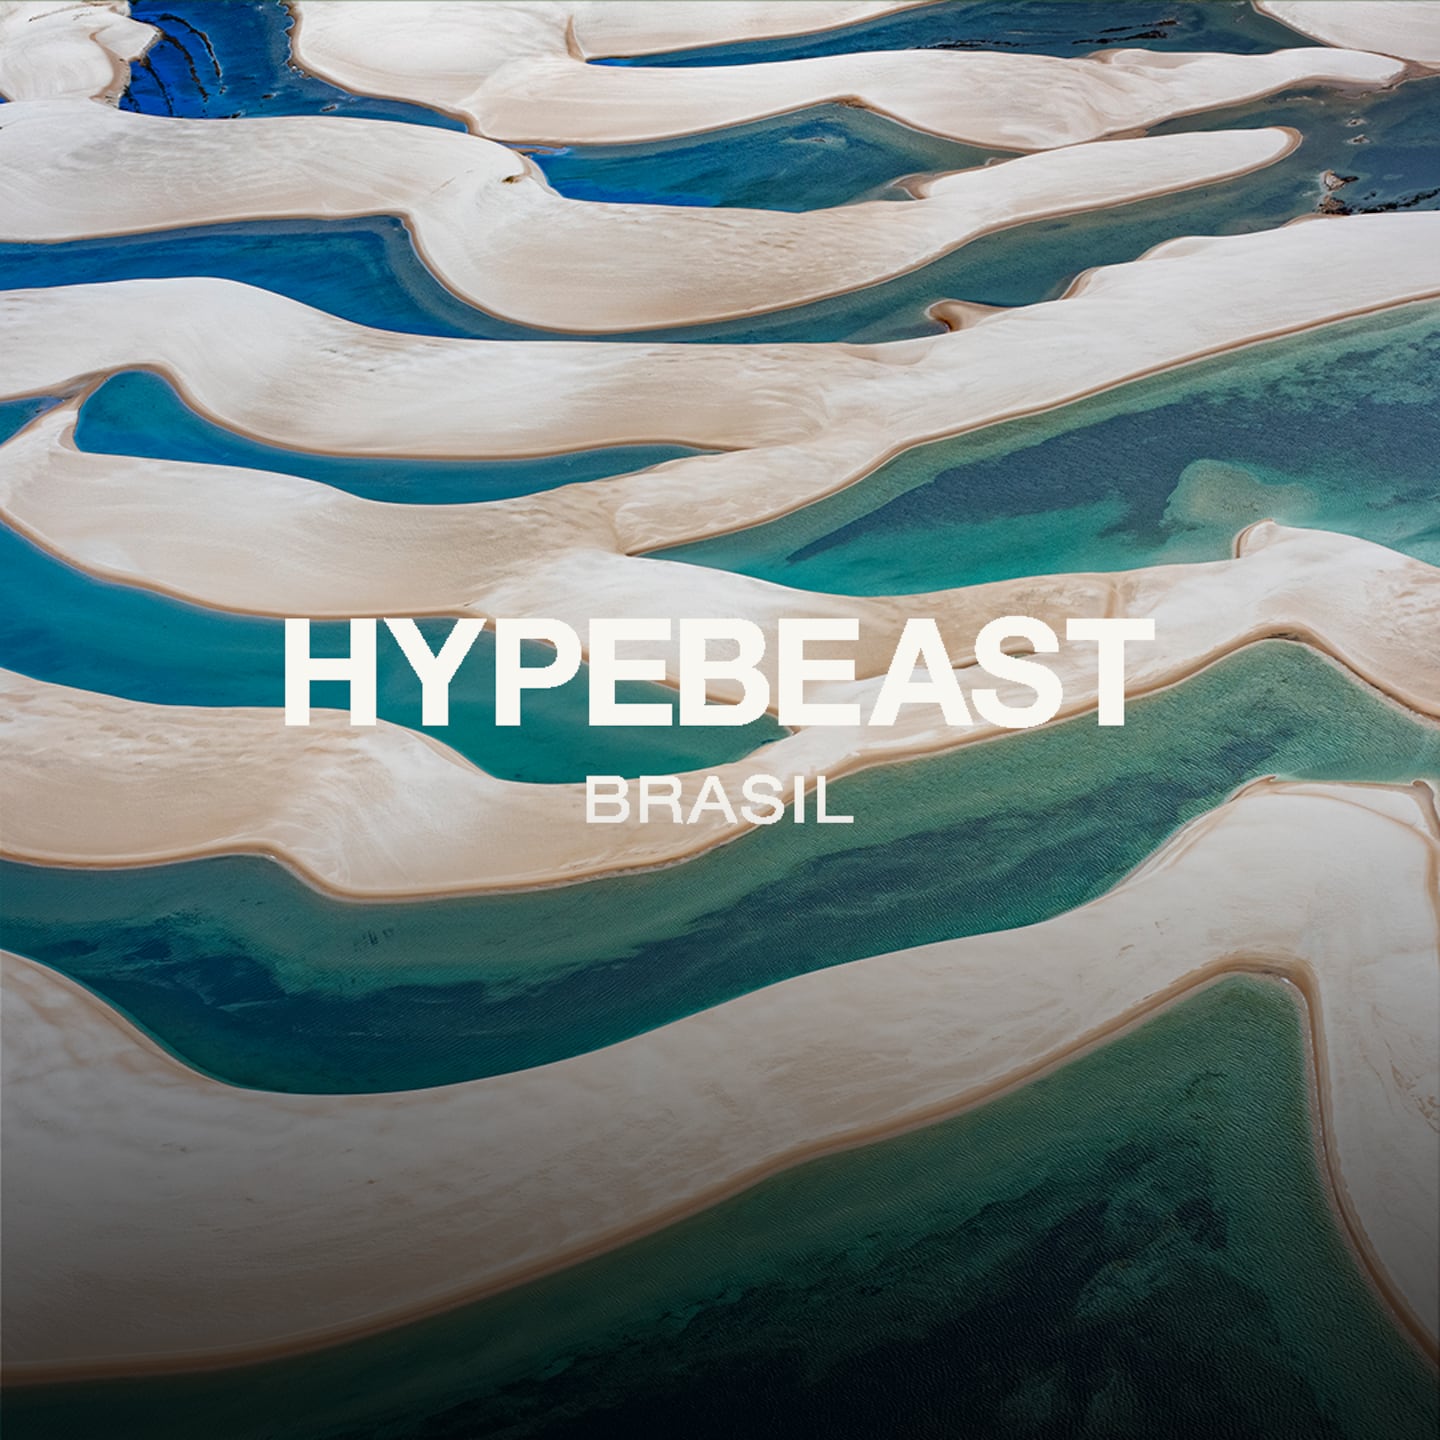 This marks the first time Hypebeast has launched a channel dedicated specifically to a Latin American audience.